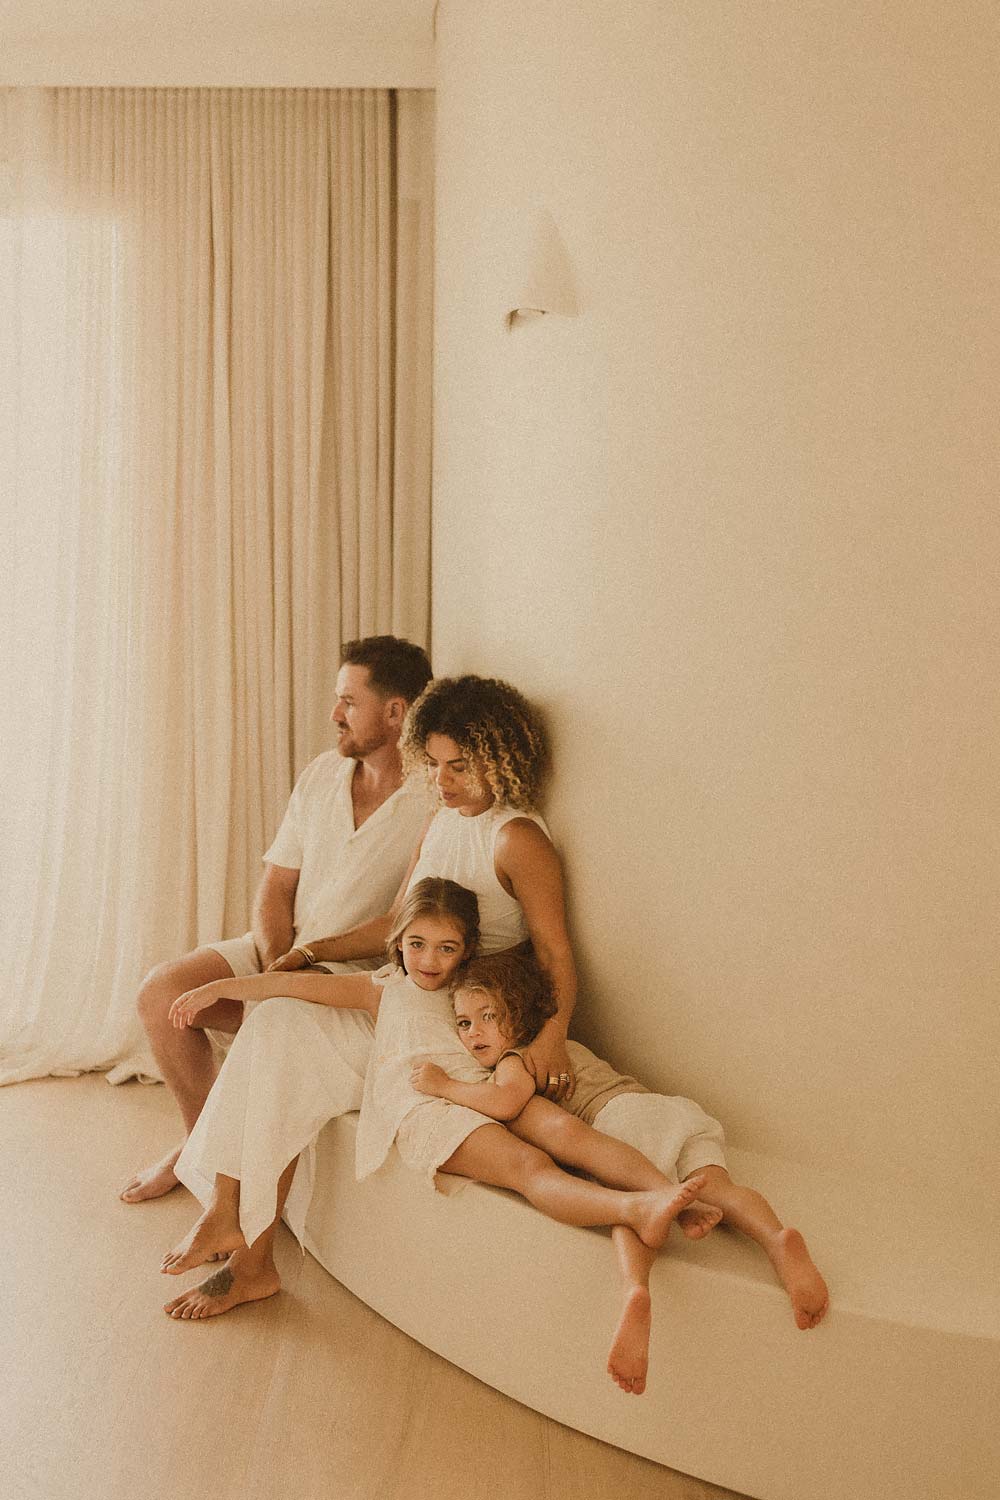 Family-photography-sydney-mum-dad-and-who-young-children-relaxing-in-very-chic-minimalist-home